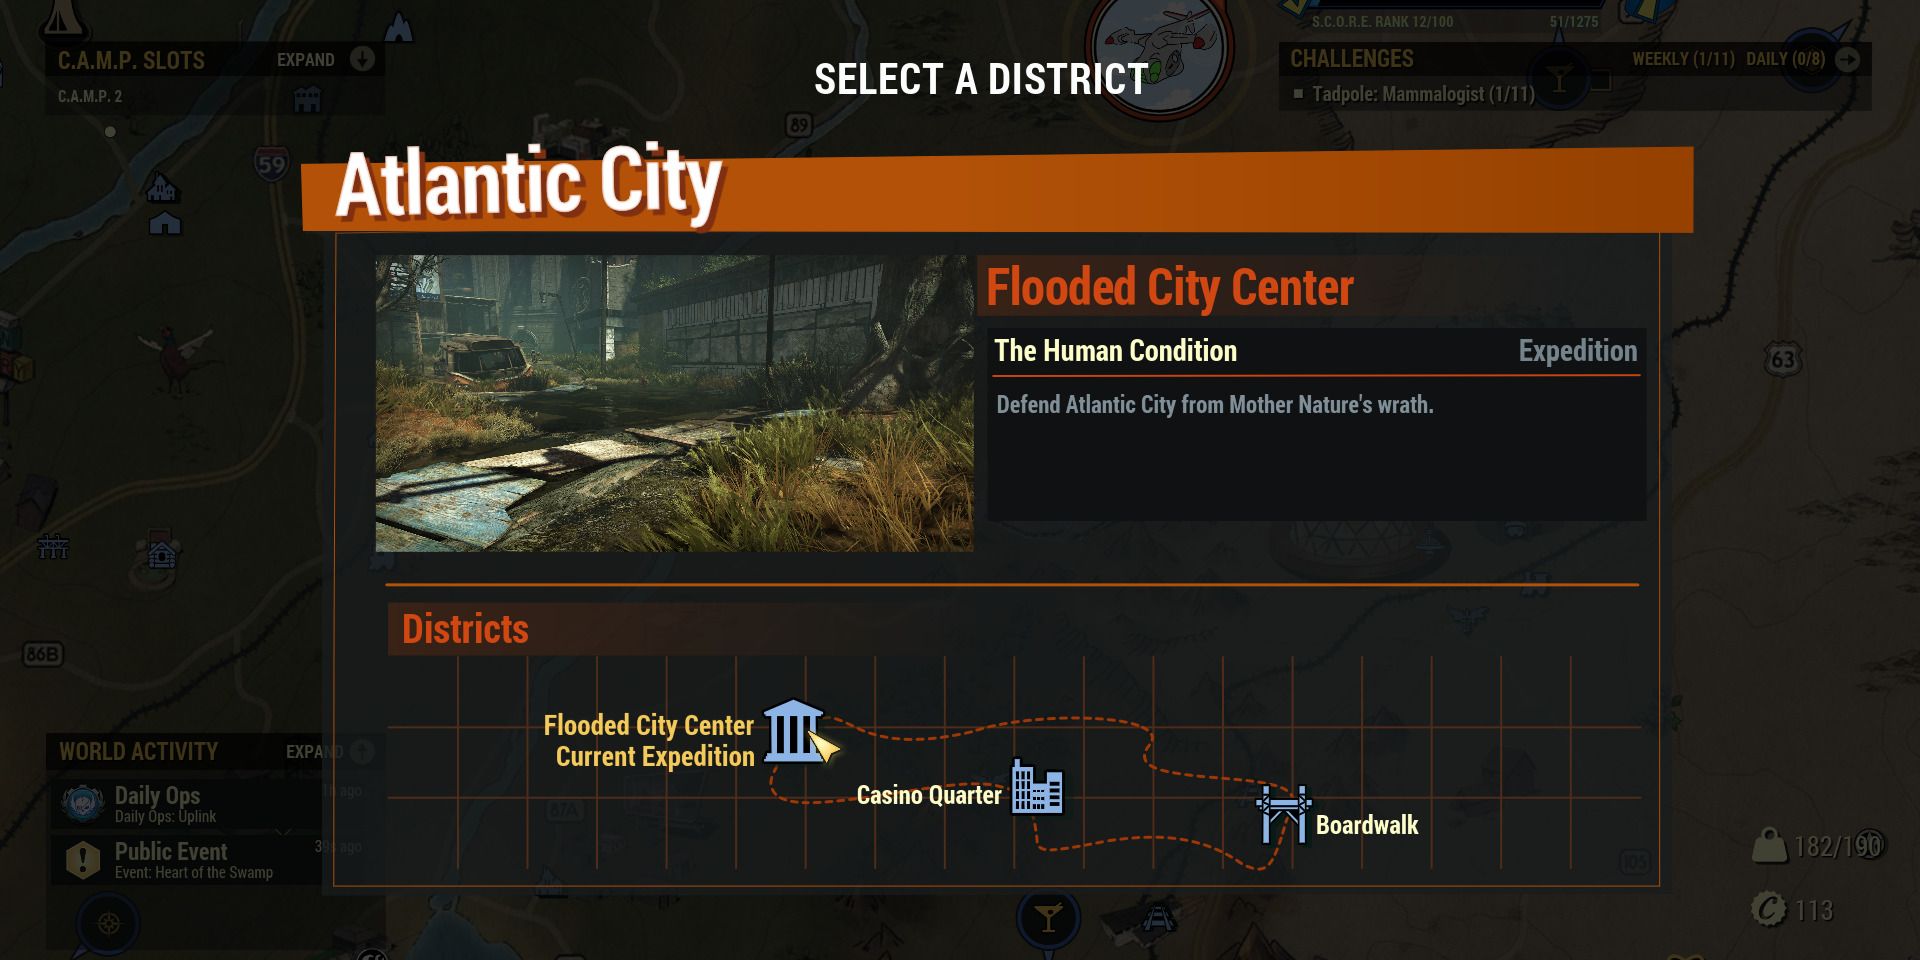 Image of the flooded ‍city center in Atlantic ‍City in ‍Fallout 76